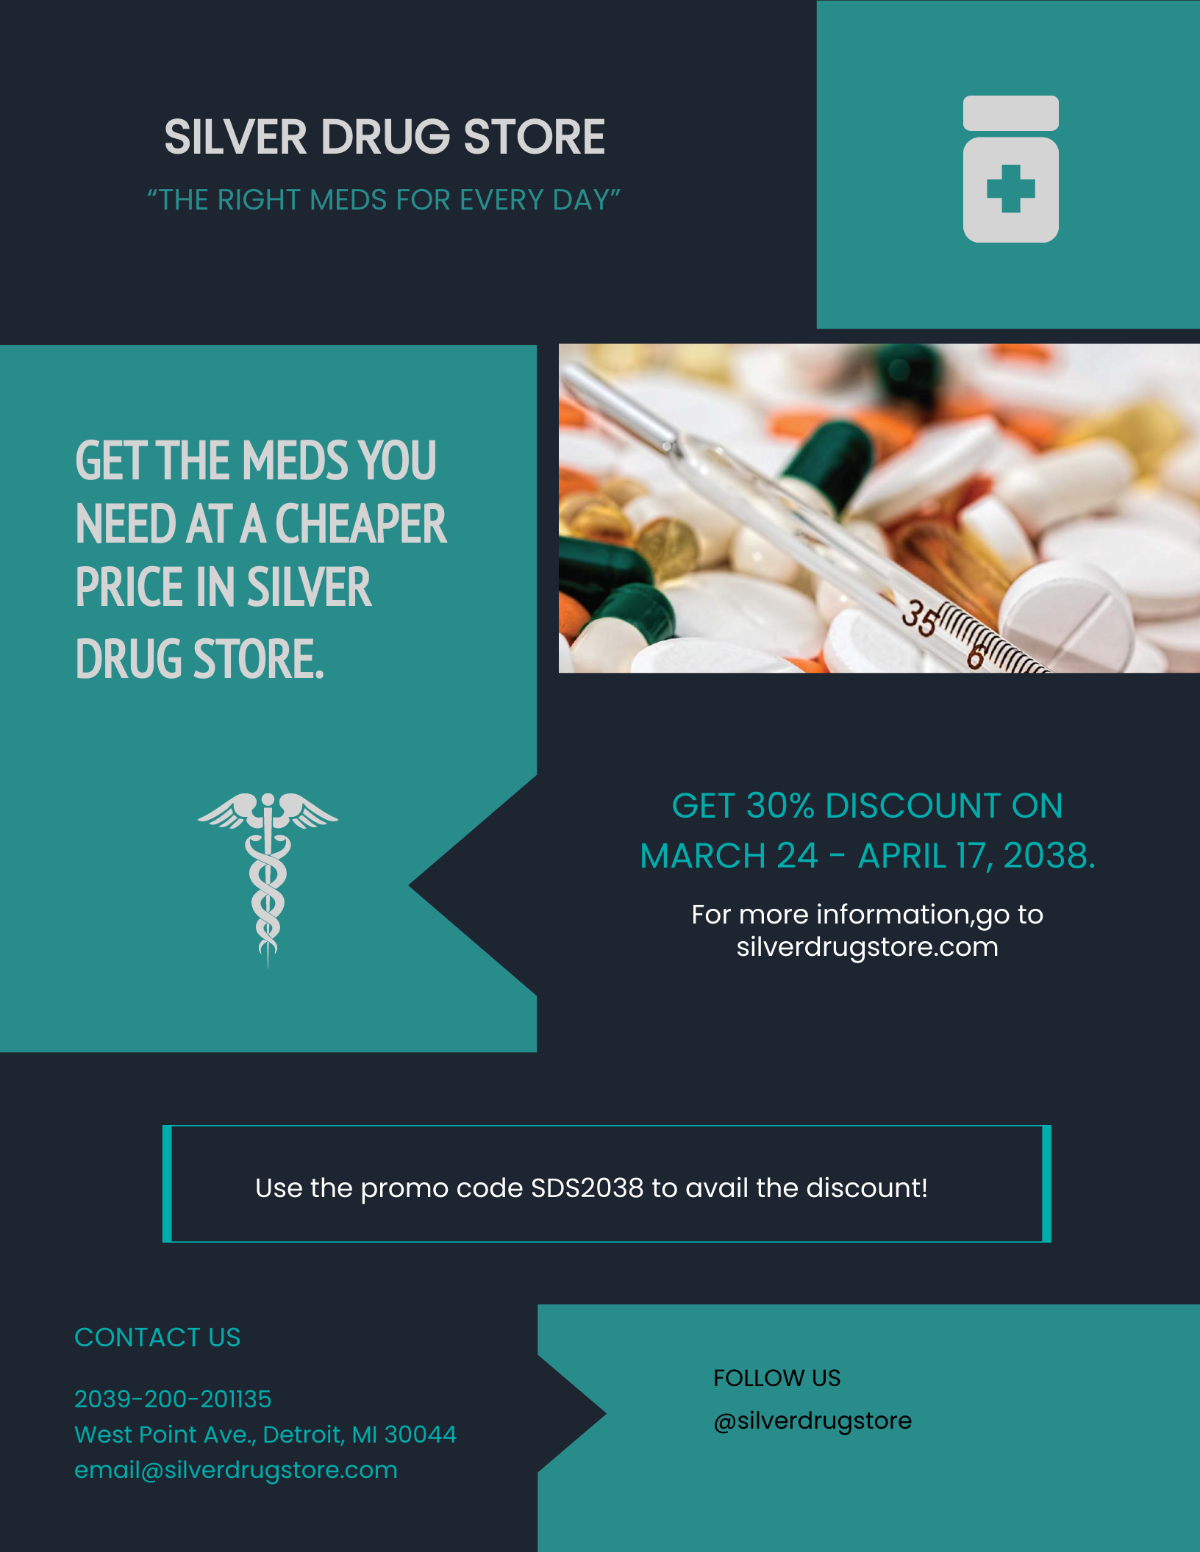 Pharmacy and Medical Supply Flyer Template